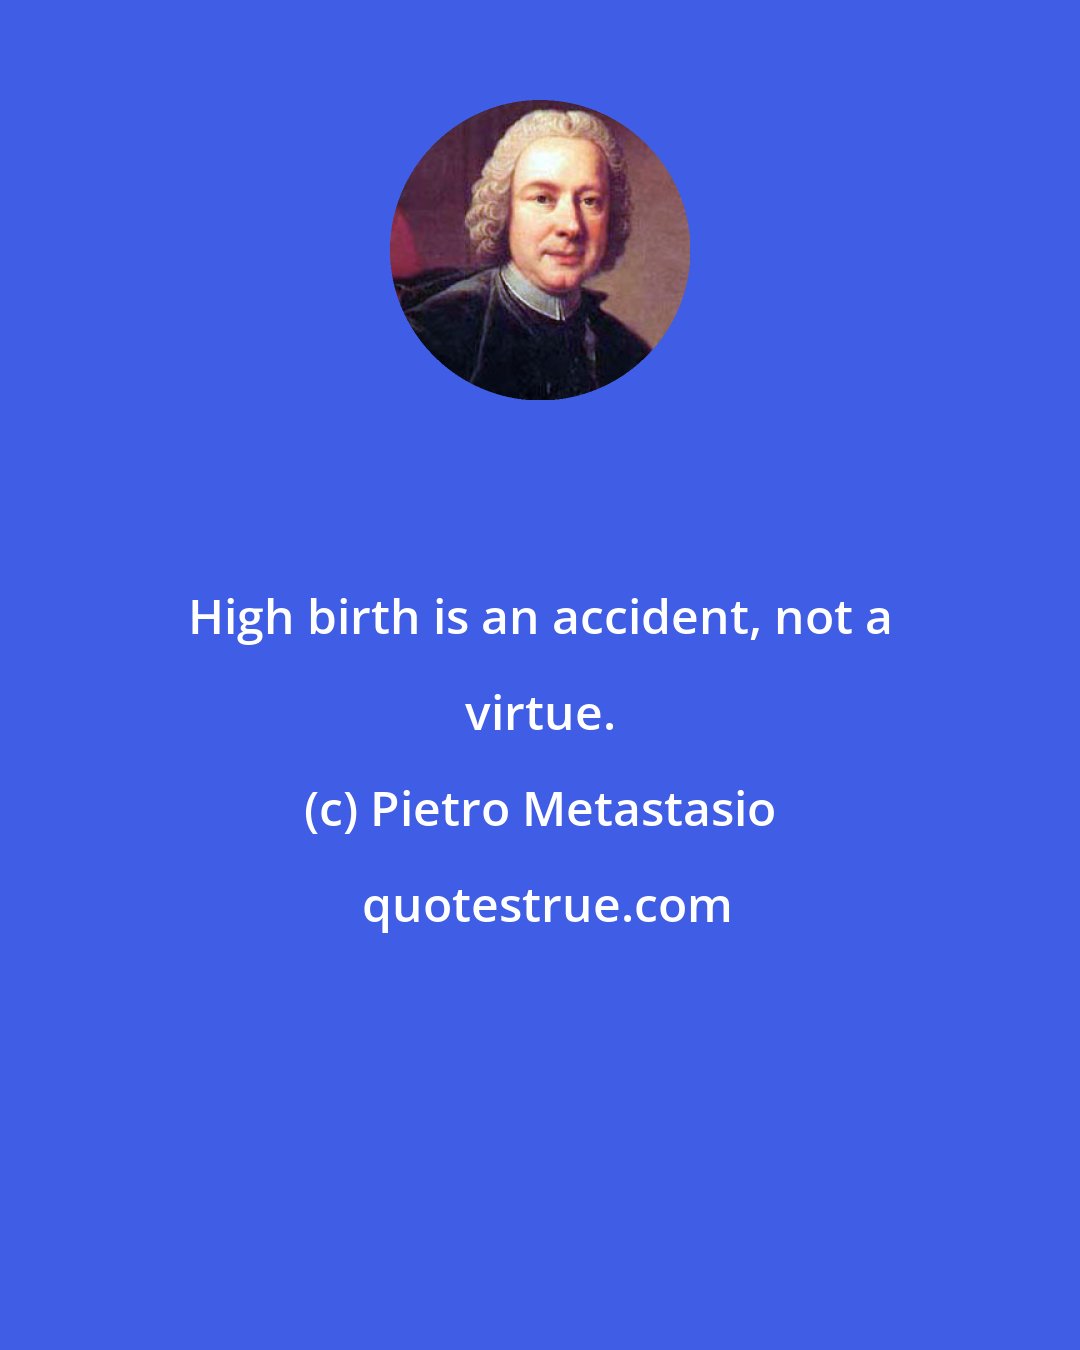 Pietro Metastasio: High birth is an accident, not a virtue.